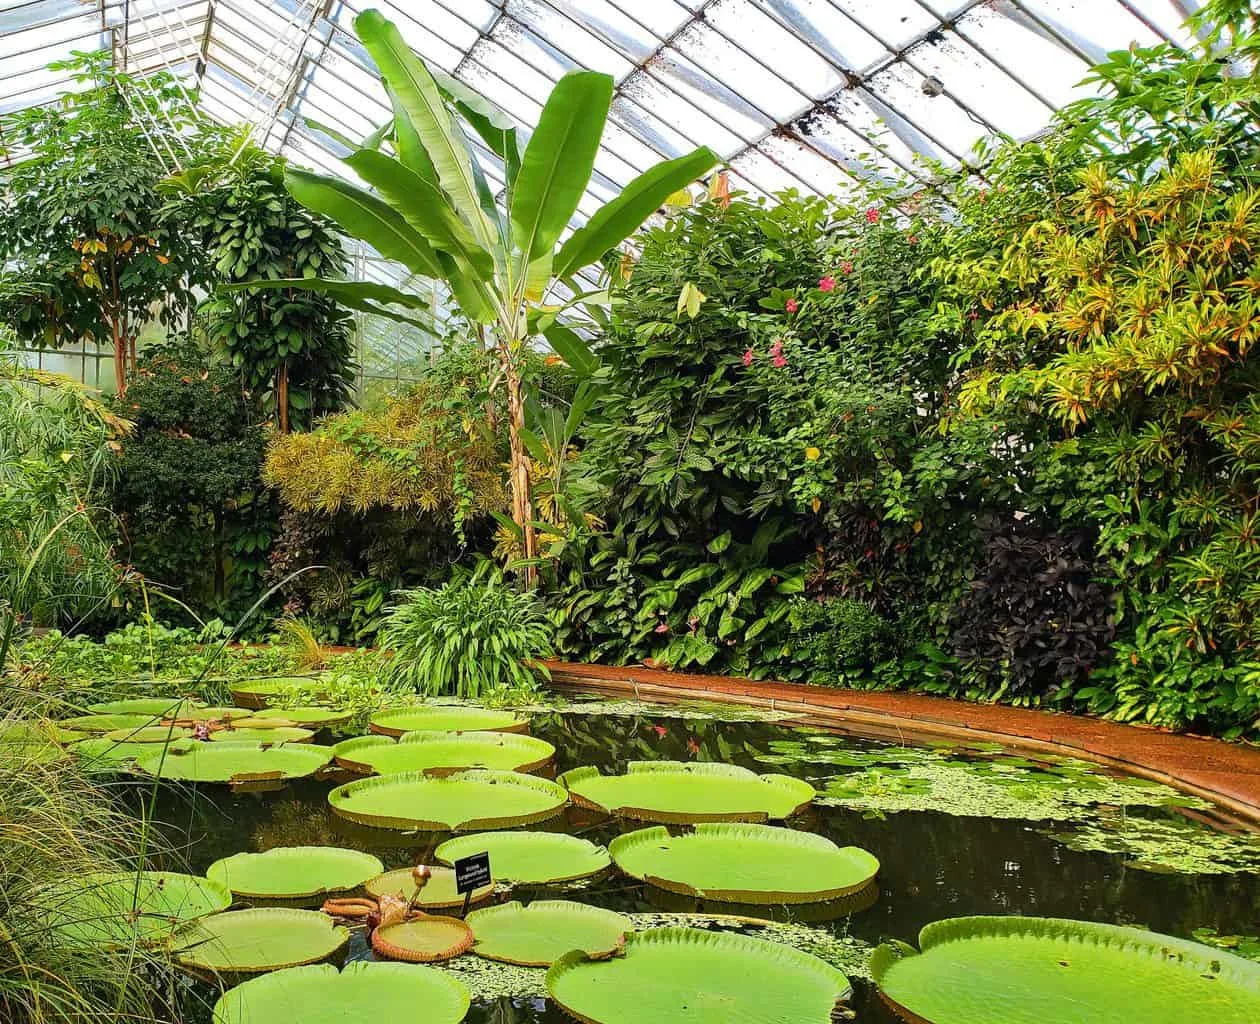 The lovely lilly pads, ponds, and green plants you'll find inside the greenhouses of the Royal Botanic Garden Edinburgh.